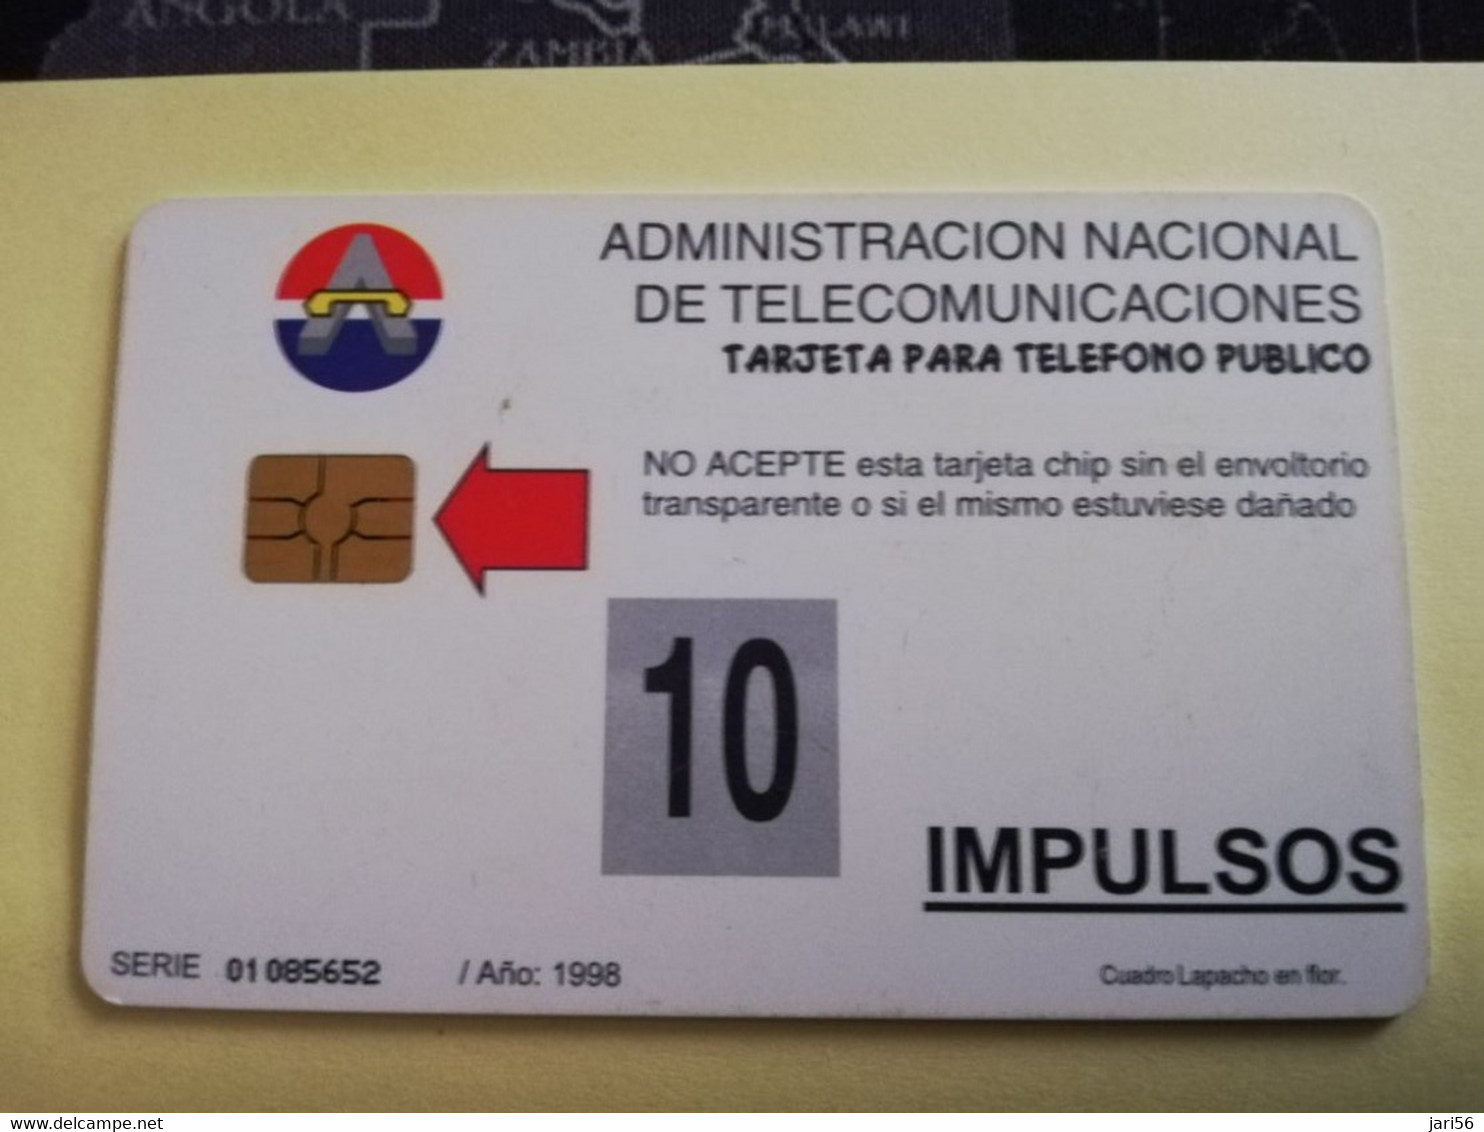 PARAGUAY  CHIPCARD  10 IMPULSOS  BLACK  TREE  Fine Used Card  ** 3481** - Paraguay